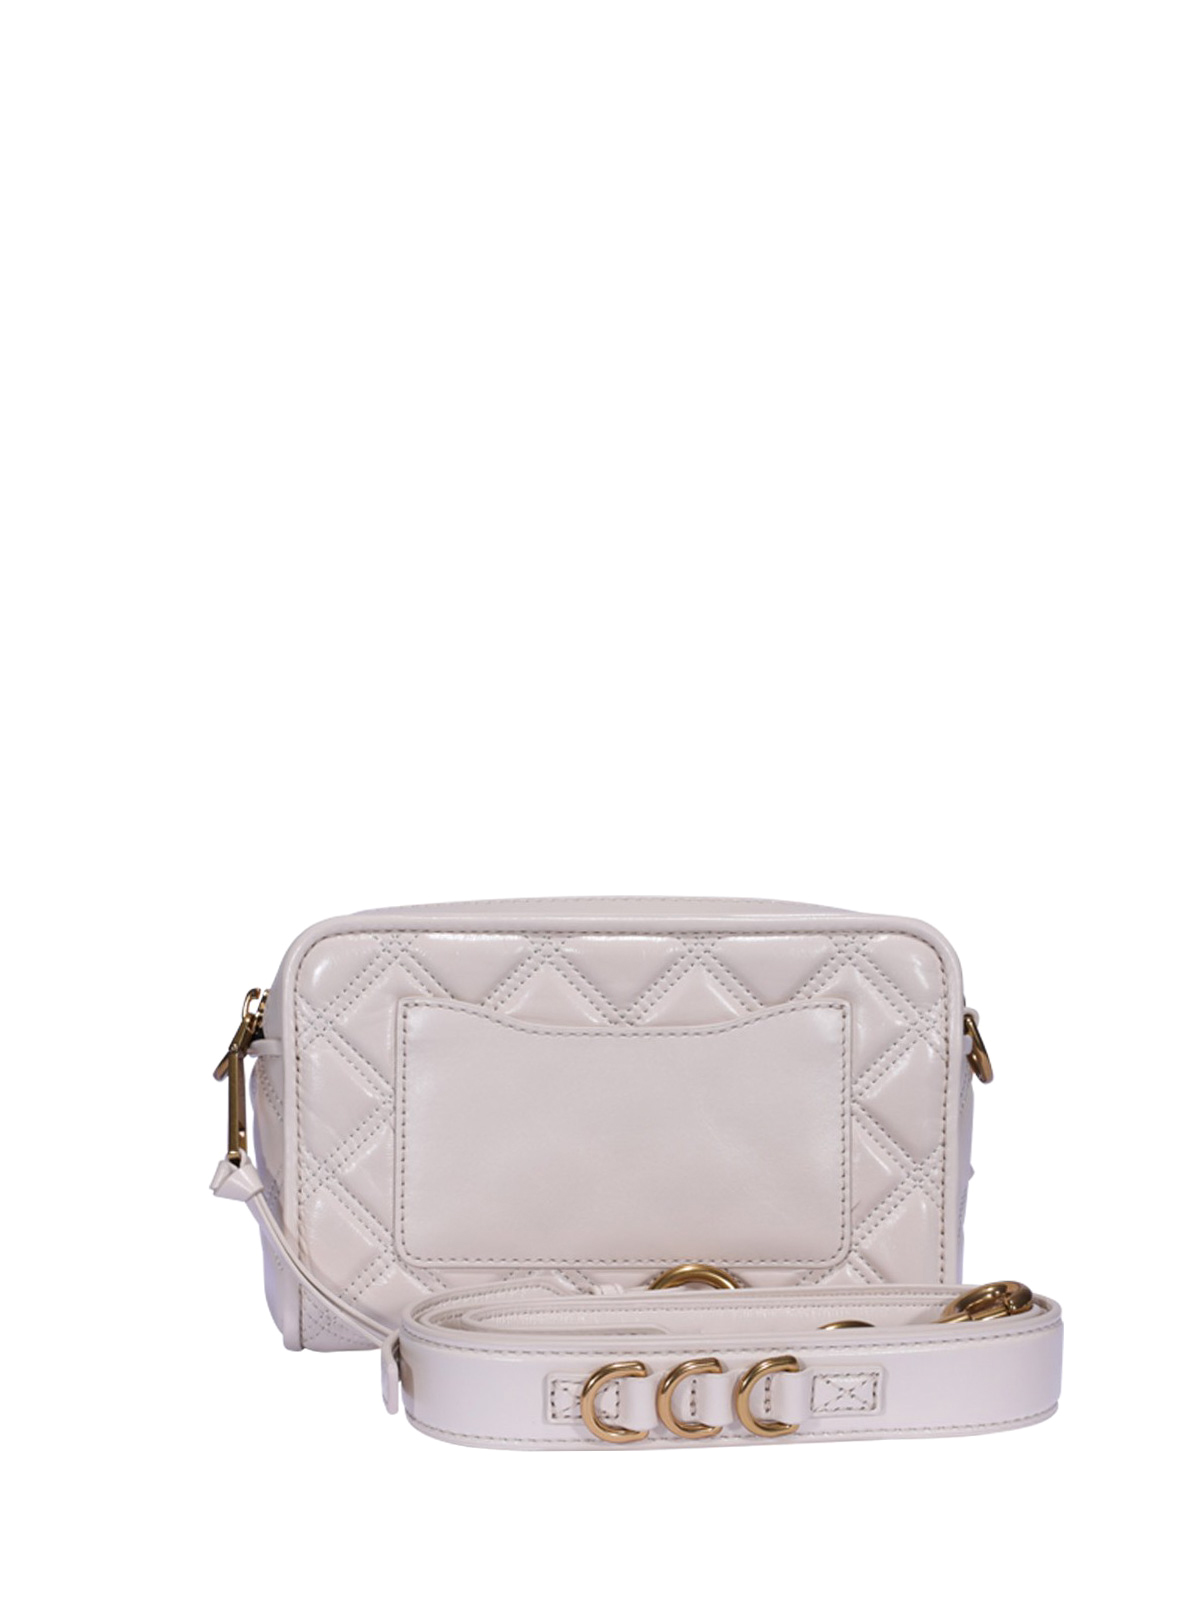 Marc by Jacobs Quilted Patent Leather Clutch Bag